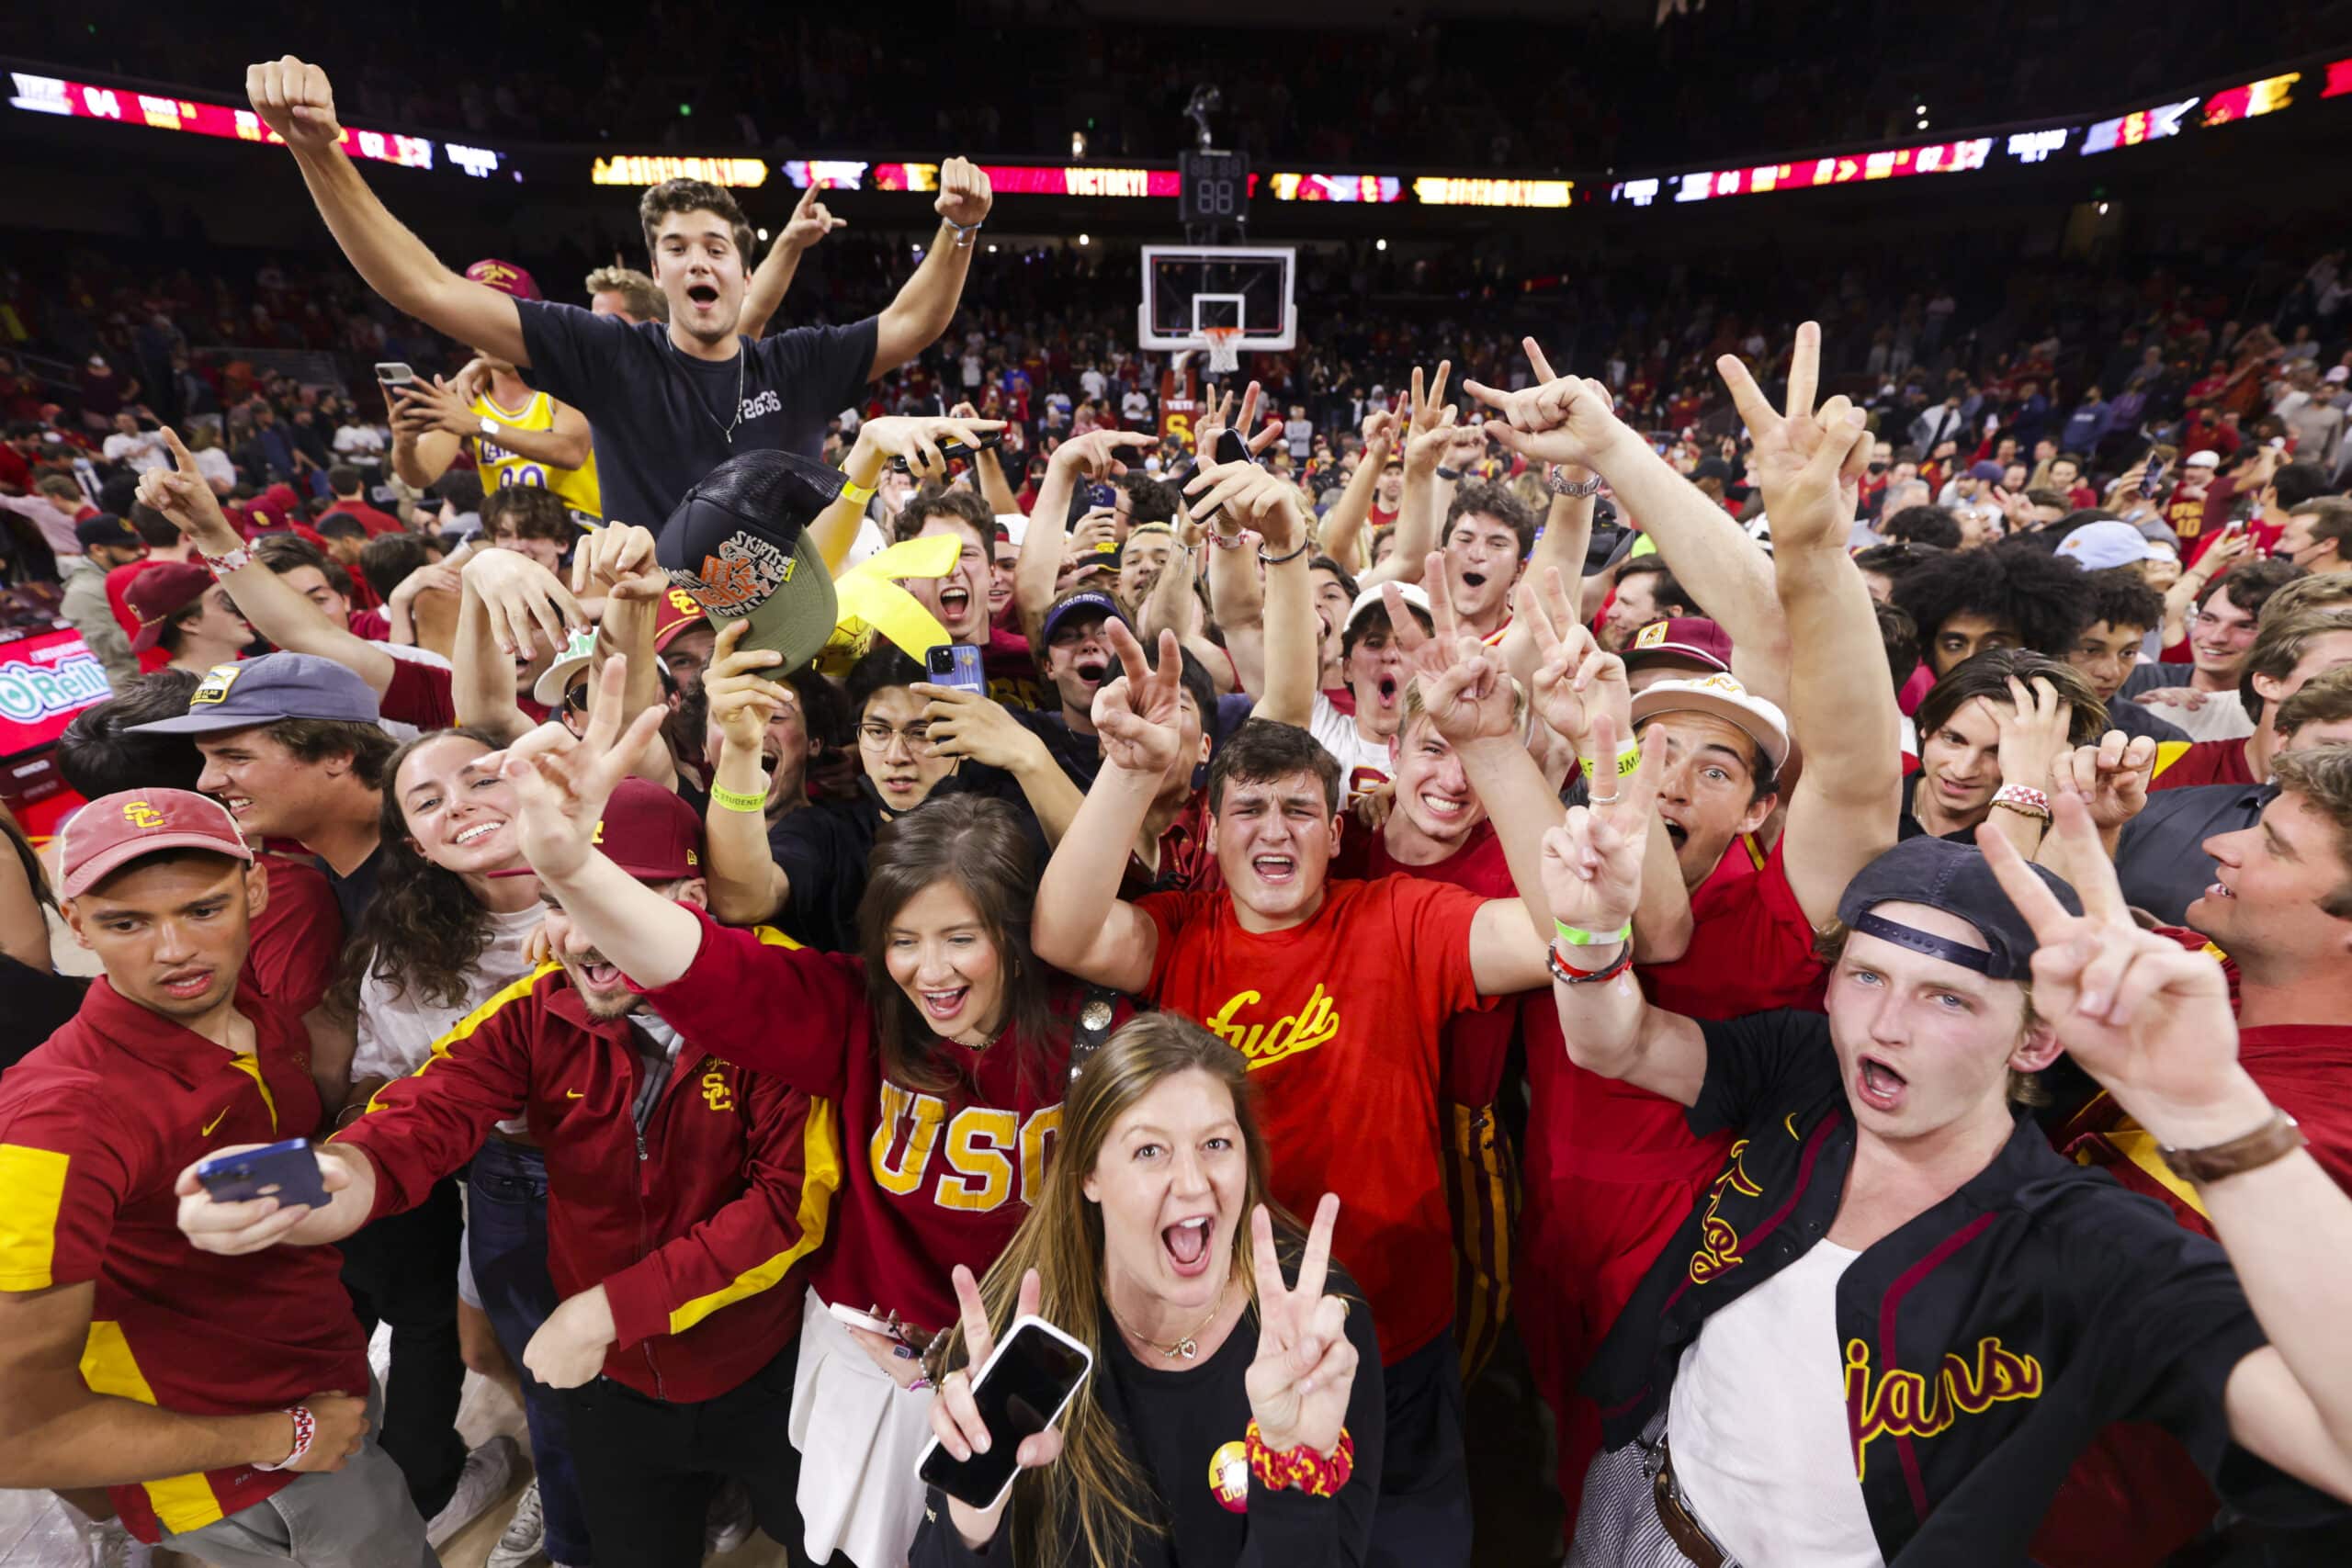 USC student section, the Legion, passionately cheering in support of their men's basketball team, creating an electrifying atmosphere at the game.